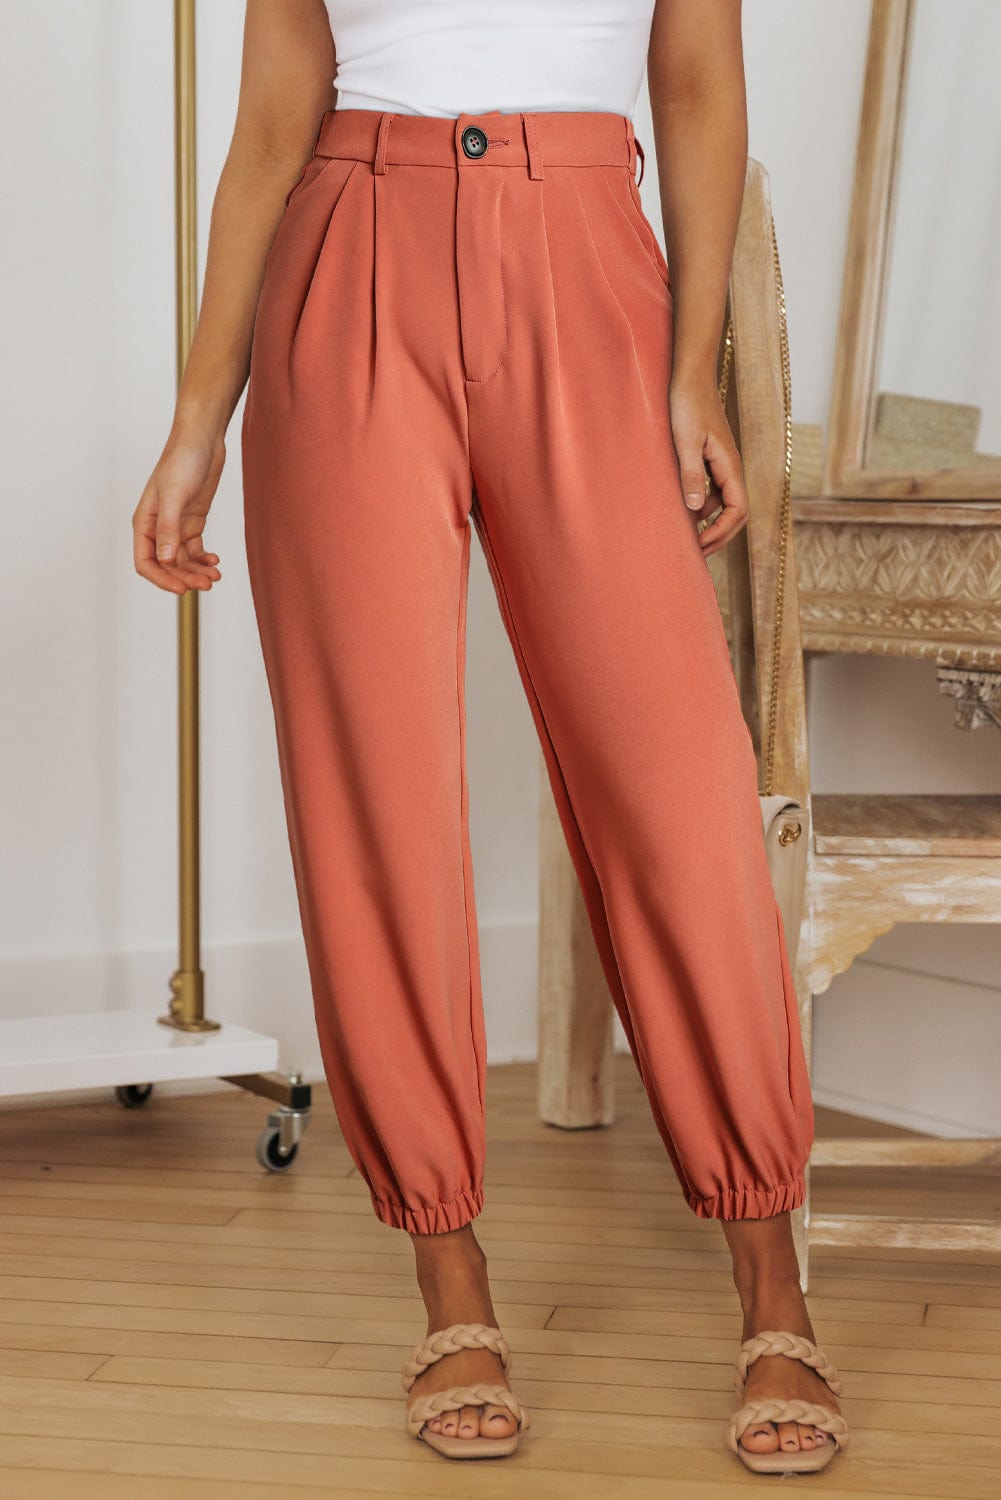 The802Gypsy  Bottoms TRAVELING GYPSY-Ankle-length High Waist Pants